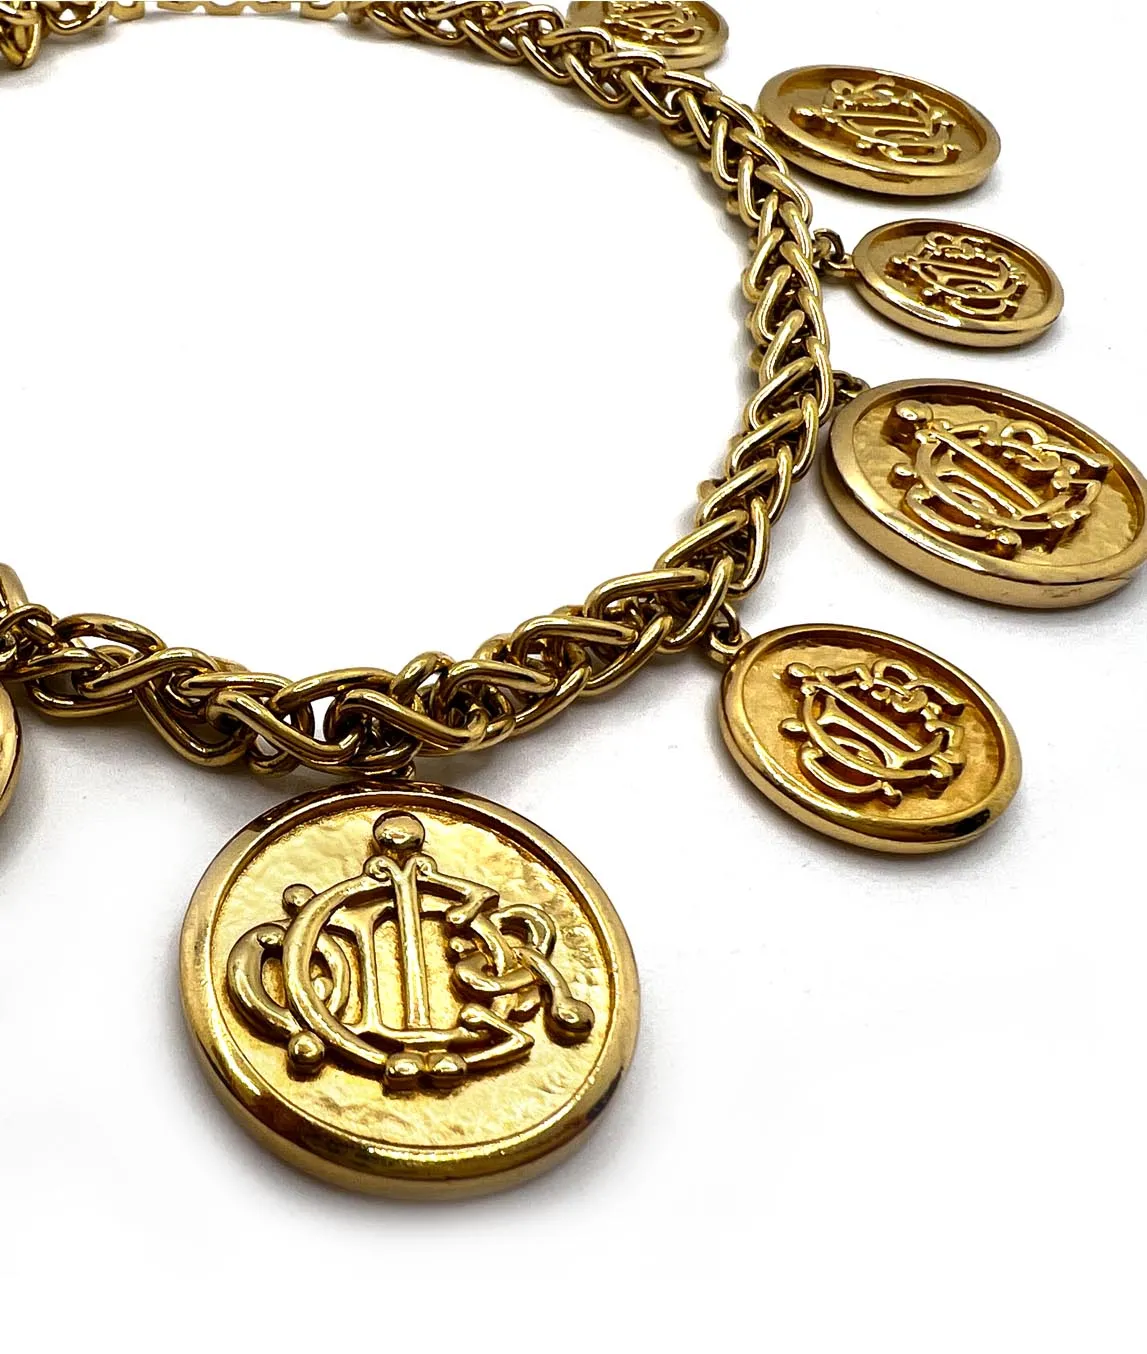 Heavy gold plated chain with Christian Dior monogram logo coin medallions